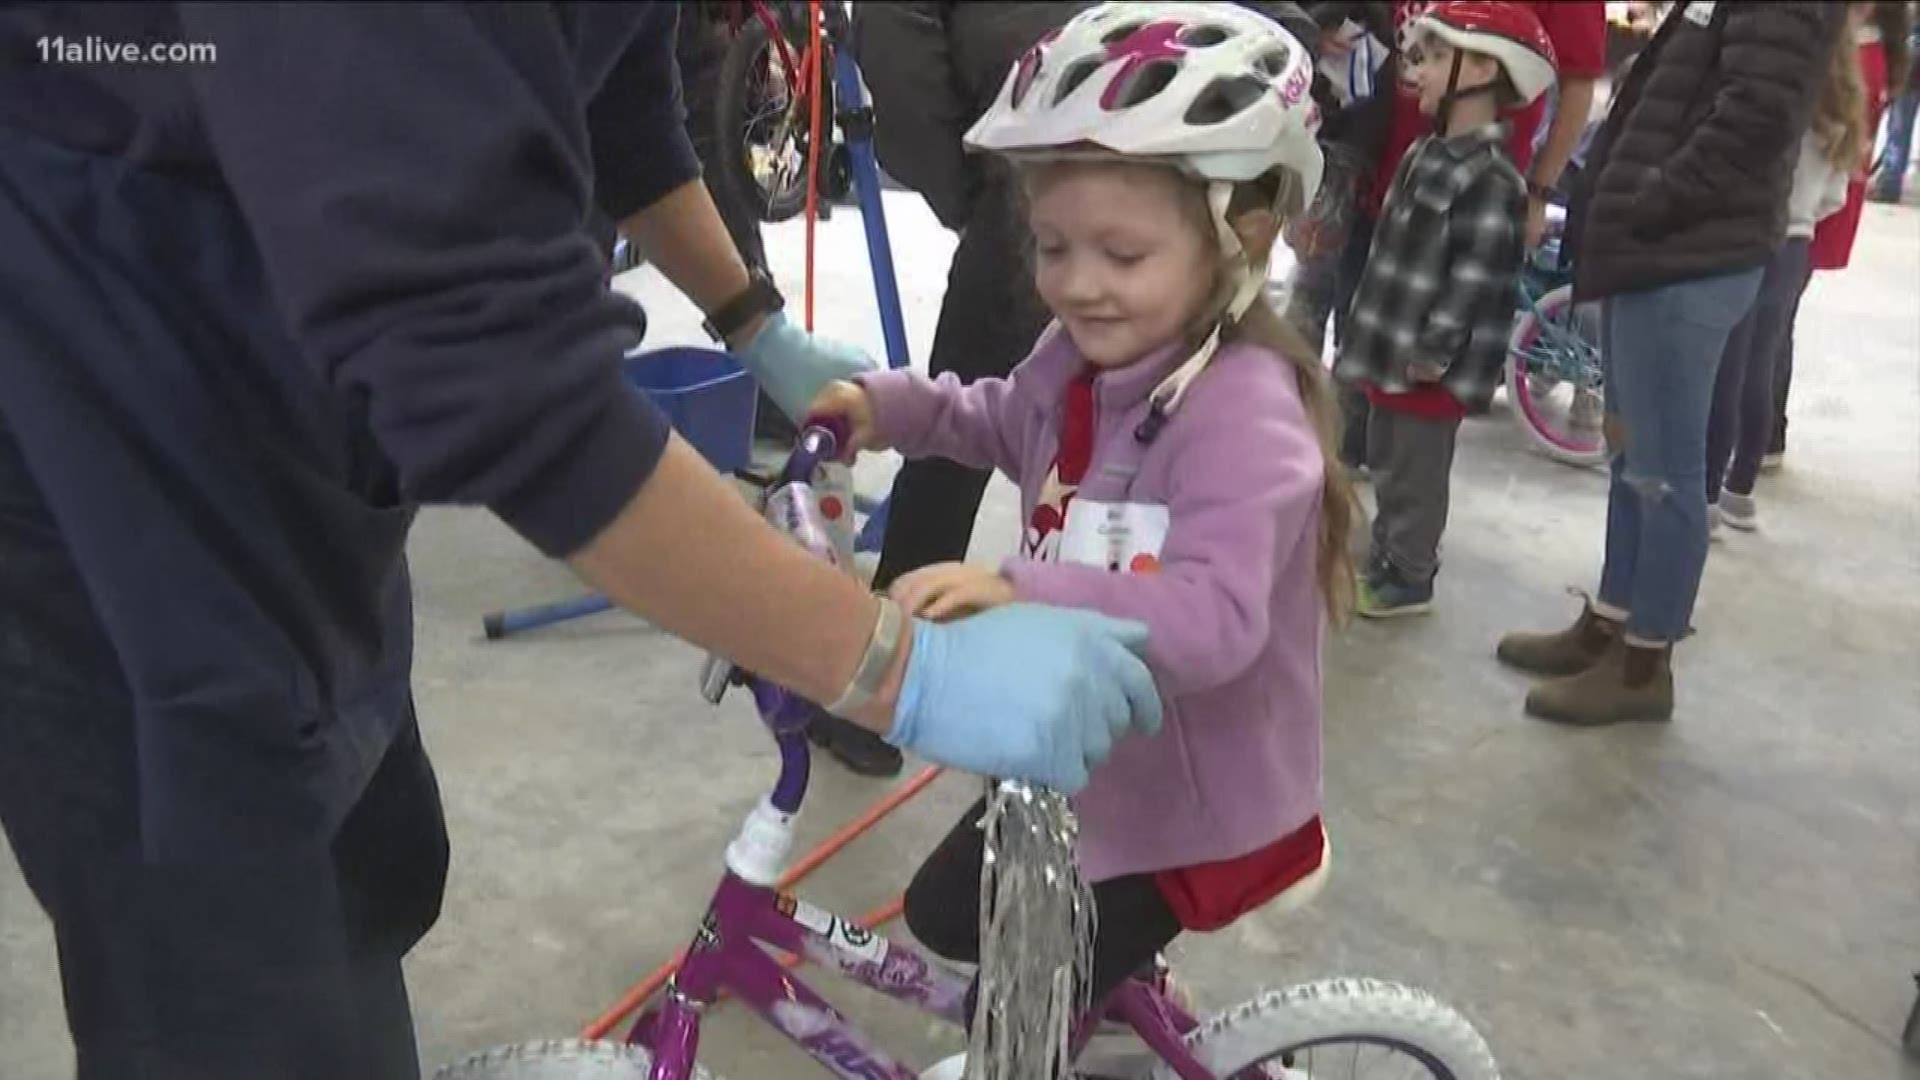 It was part of the fourth annual Free Bikes For Kids Giveaway. Organizers say it's to make sure every kid has a childhood.